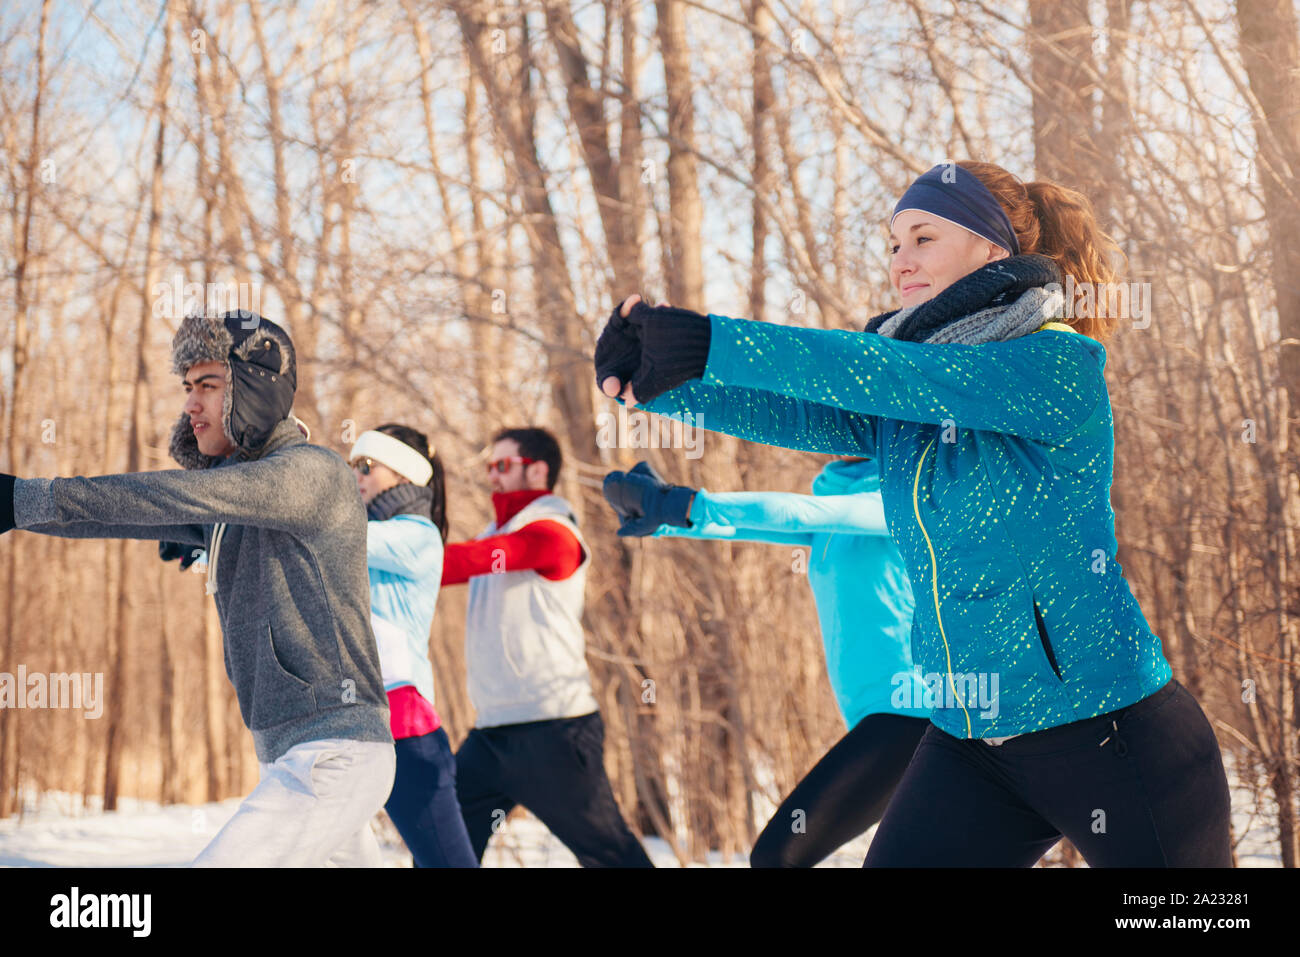 Group of millenial young adult friends stretch and strengthen in a snow filled park Stock Photo